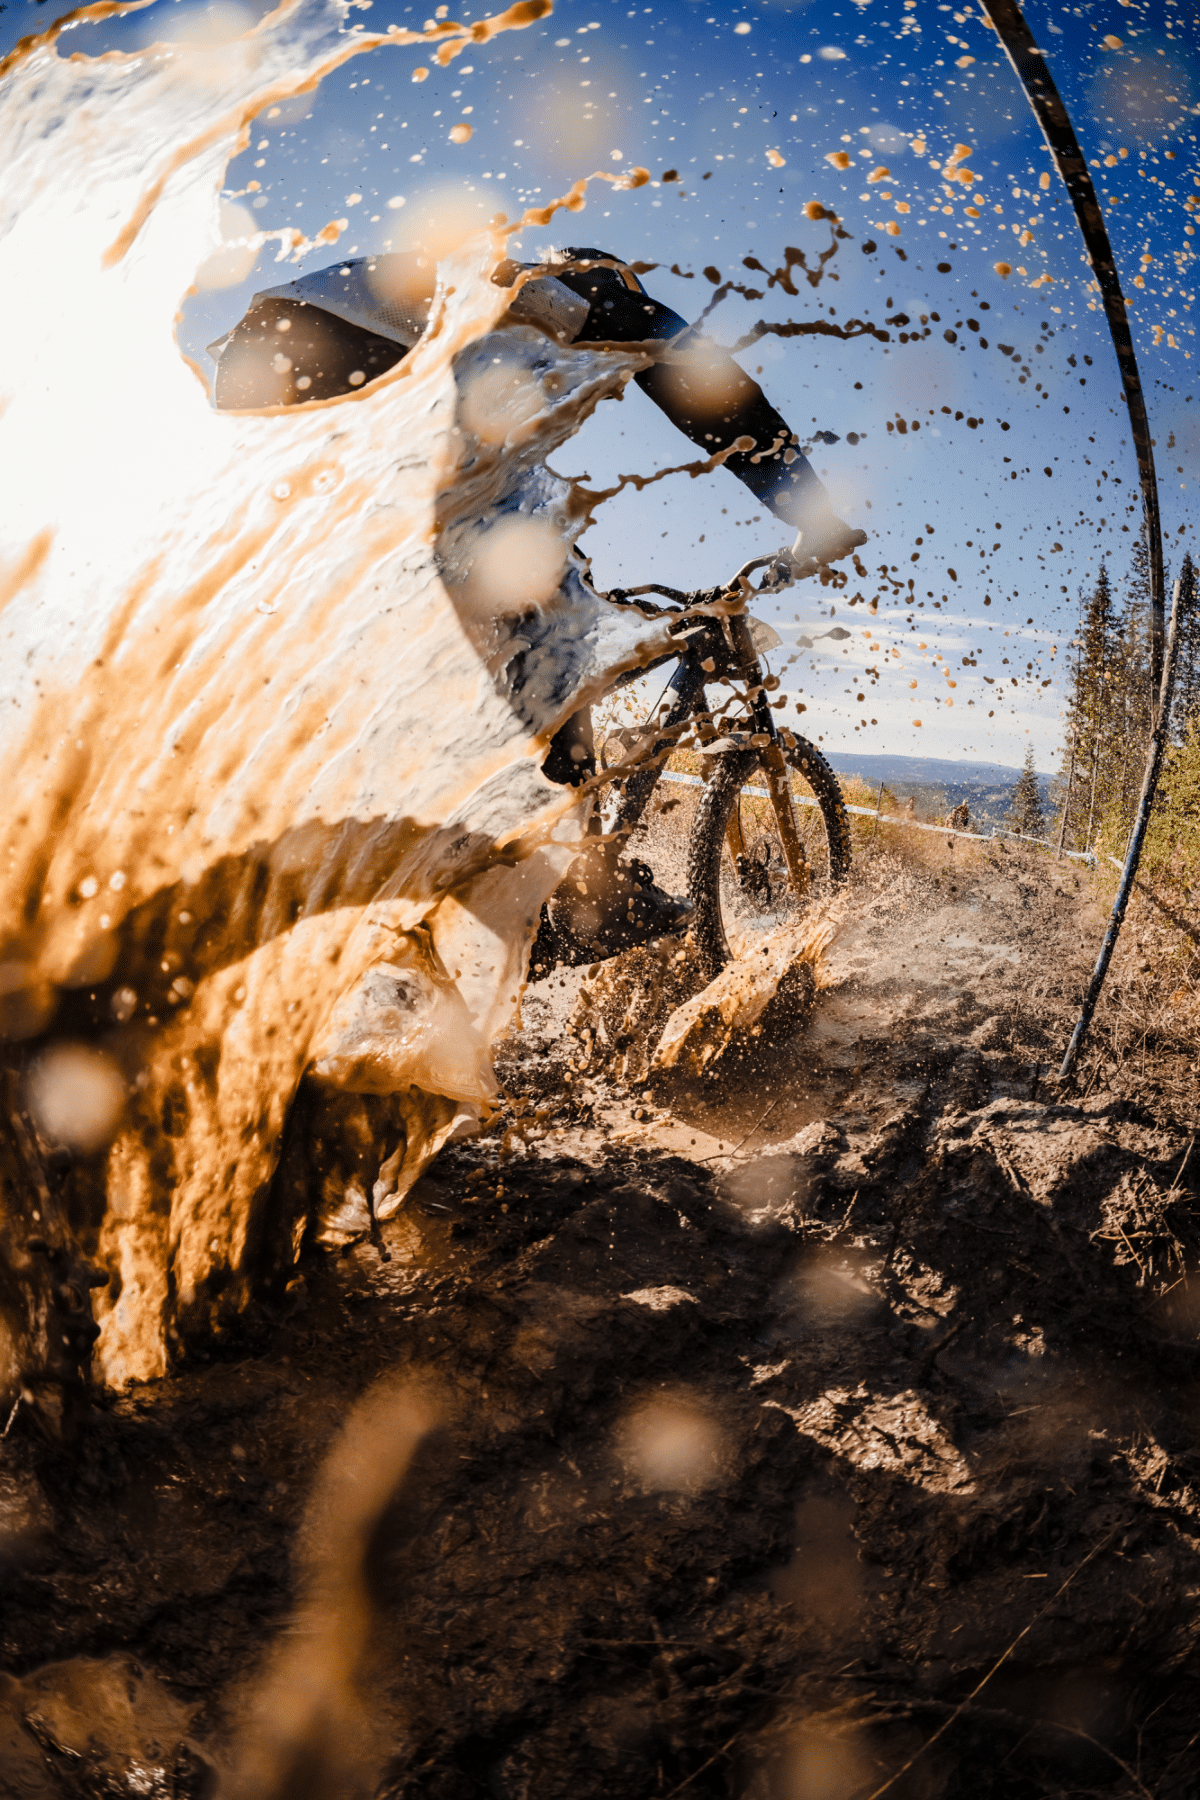 A rider passes through a muddy part of the course at the Norwegian National Championships in Hafjell Bike Park